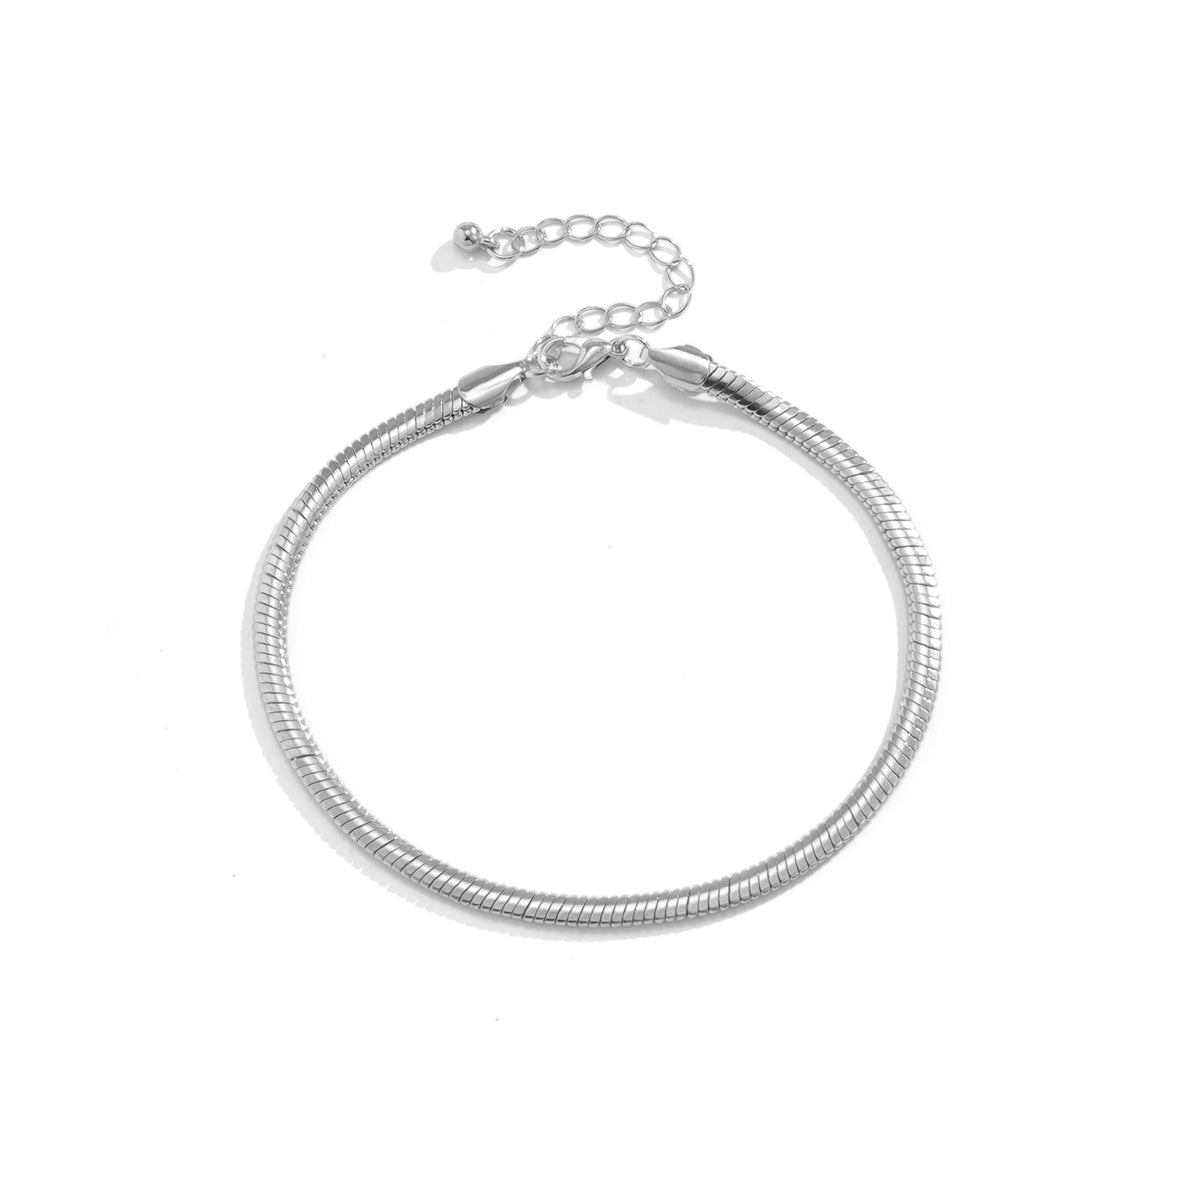 Silver-Plated Herringbone Chain Anklet